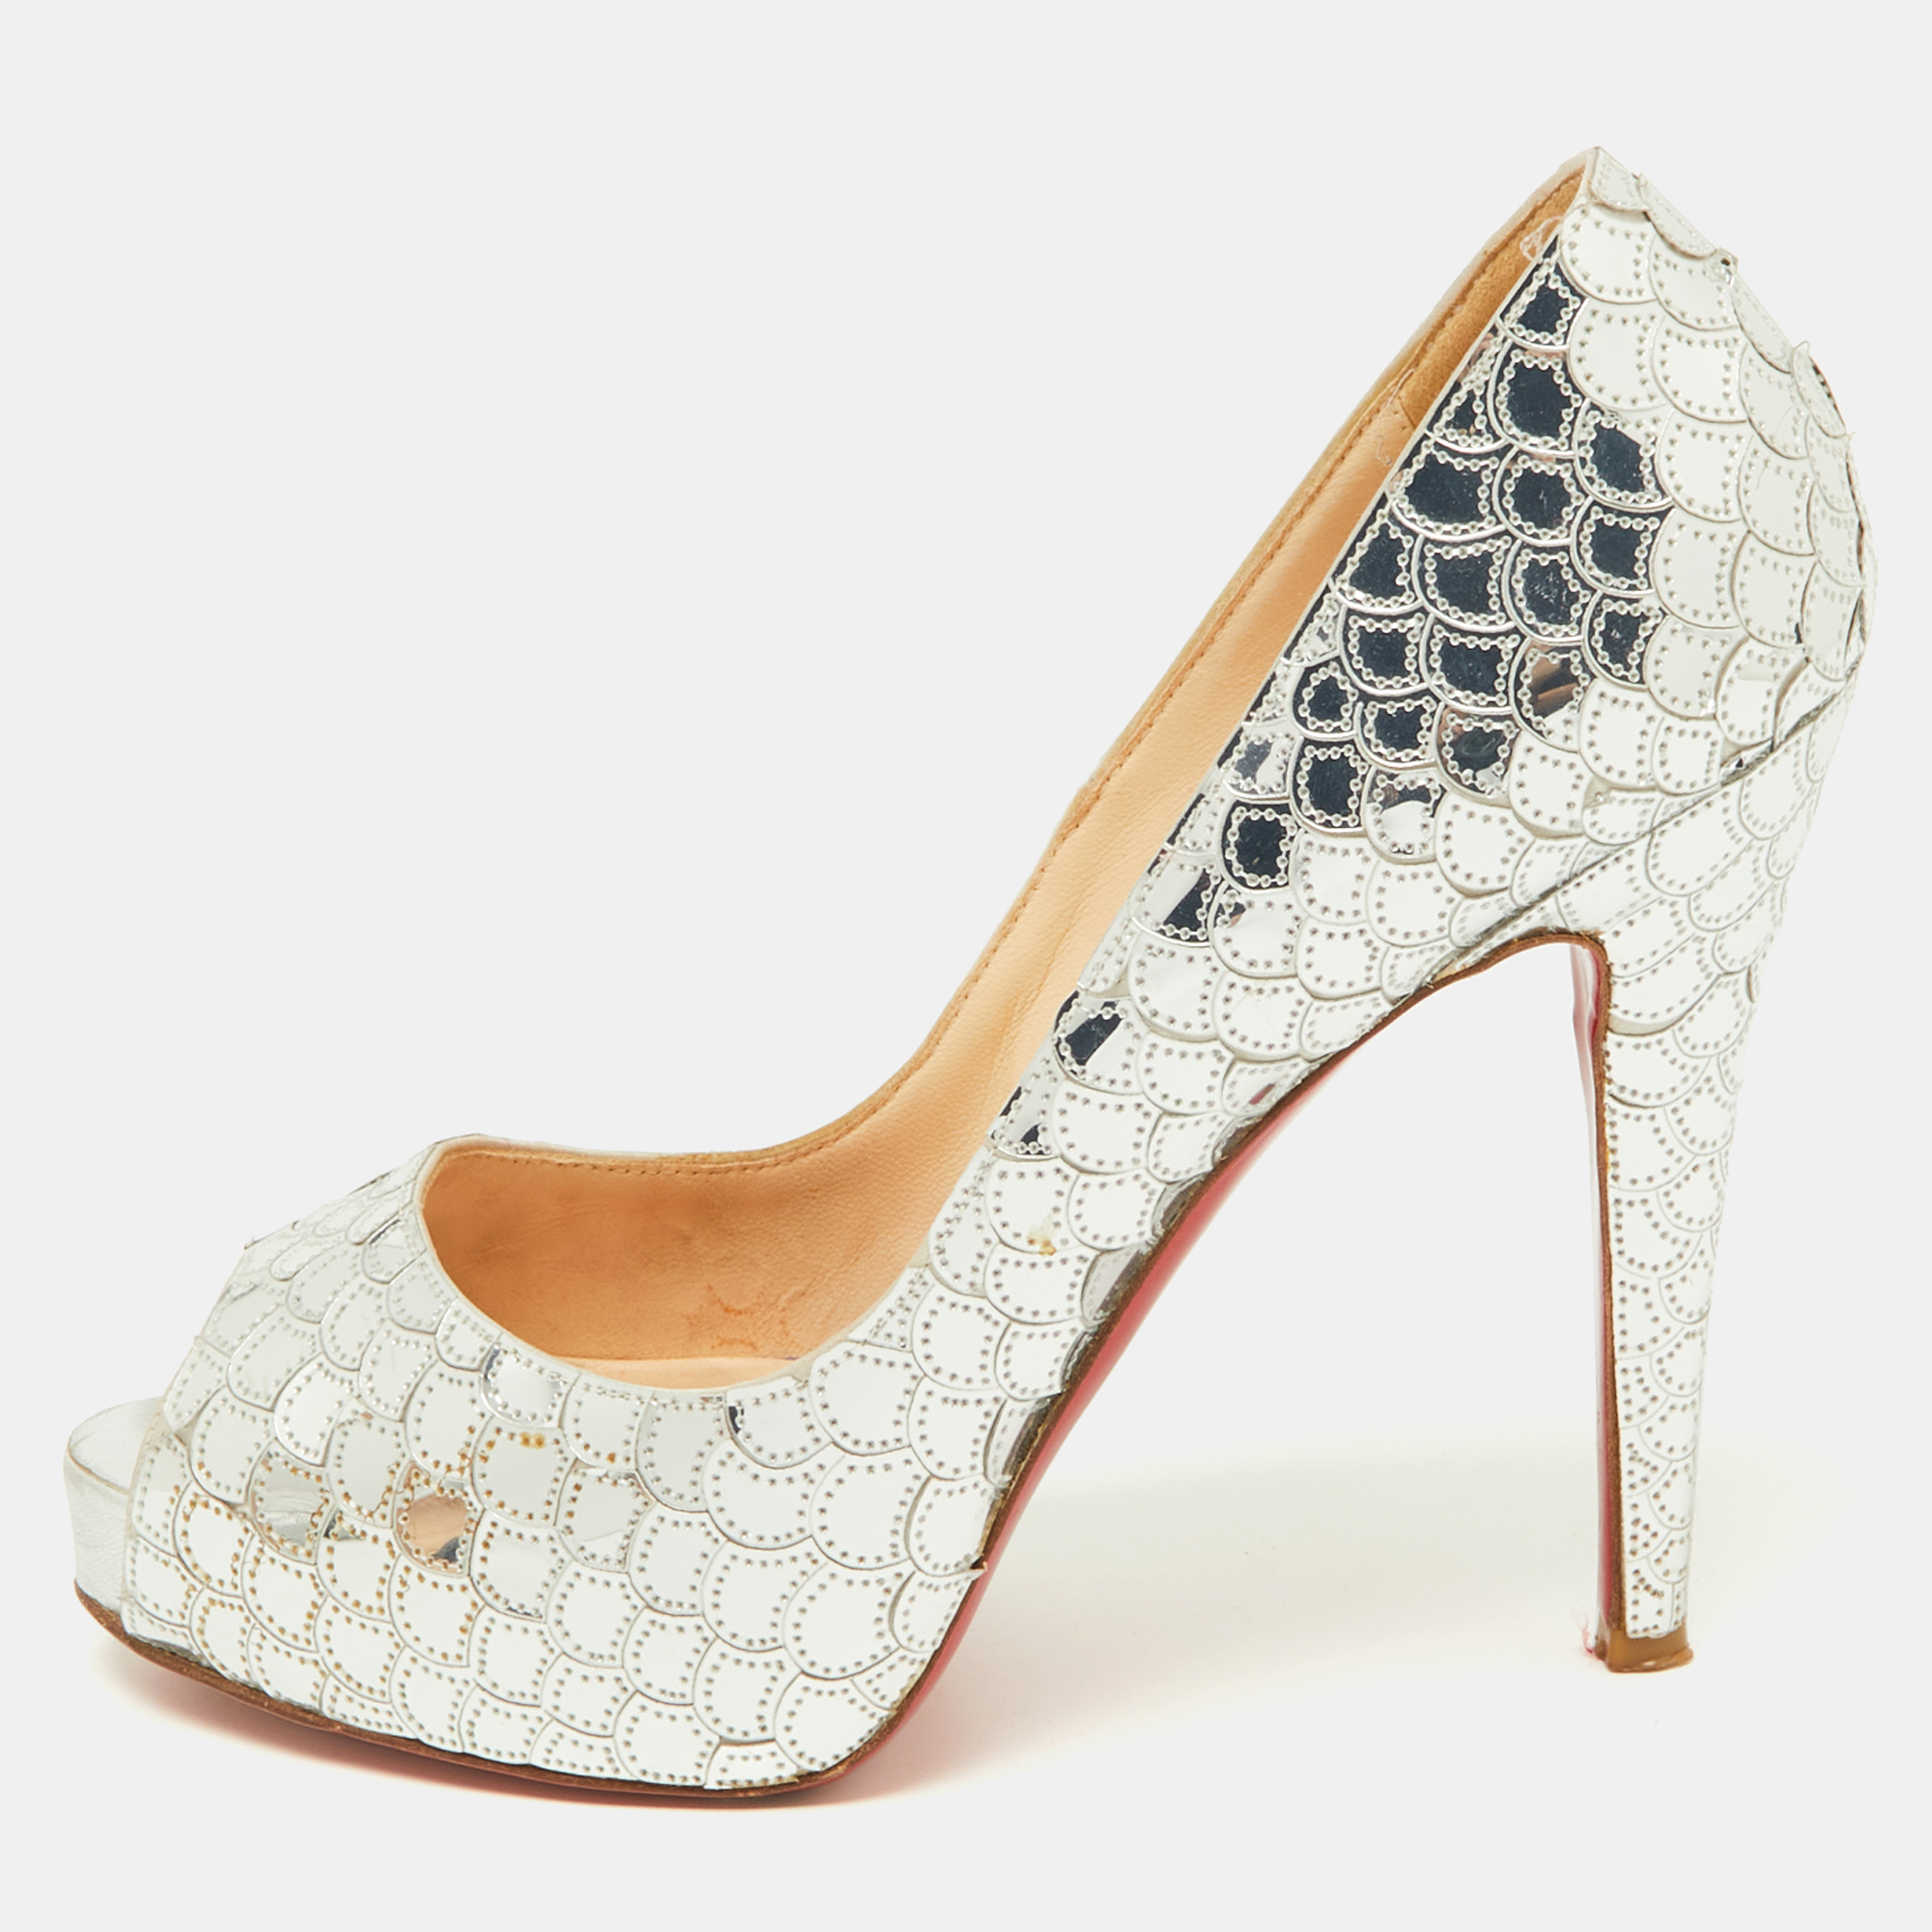 Christian louboutin silver scaled sequins and leather poseidon pumps size 38